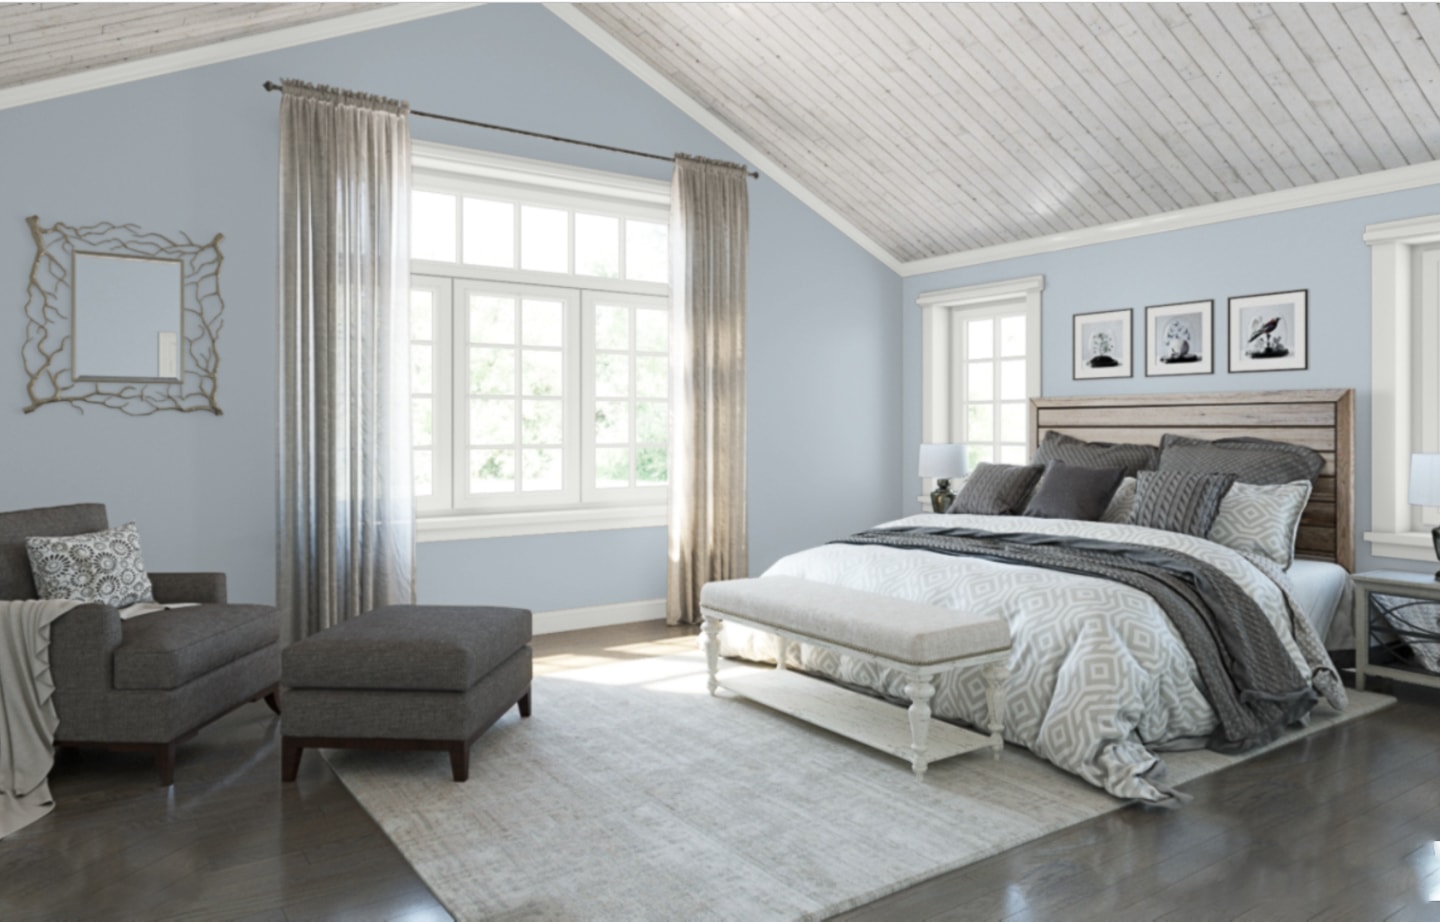 A bedroom painted in Sherwin Williams Upward